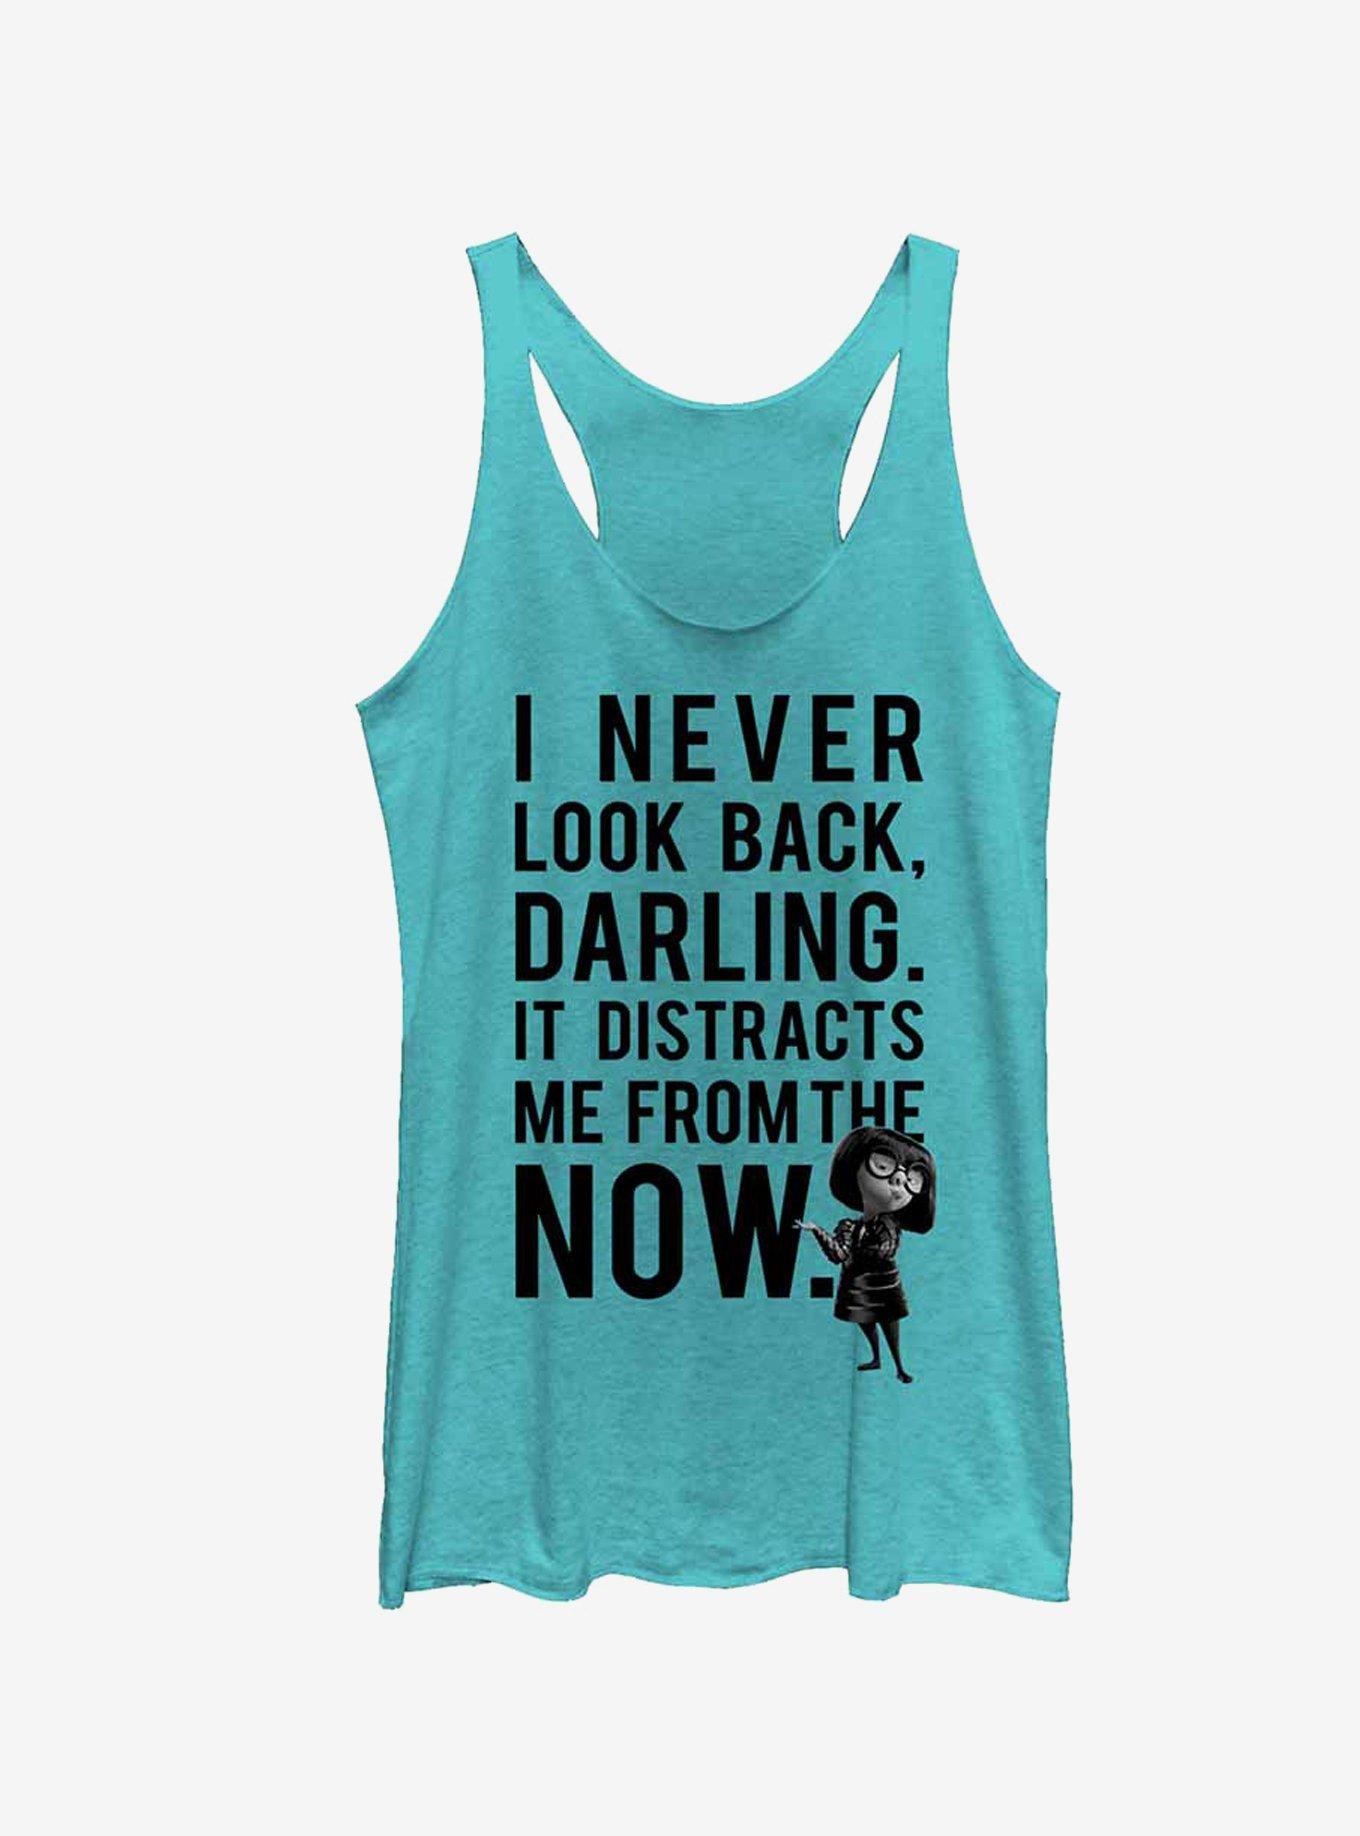 Hot Topic Disney Pixar Coco Seize Your Moment Girls Tank Top